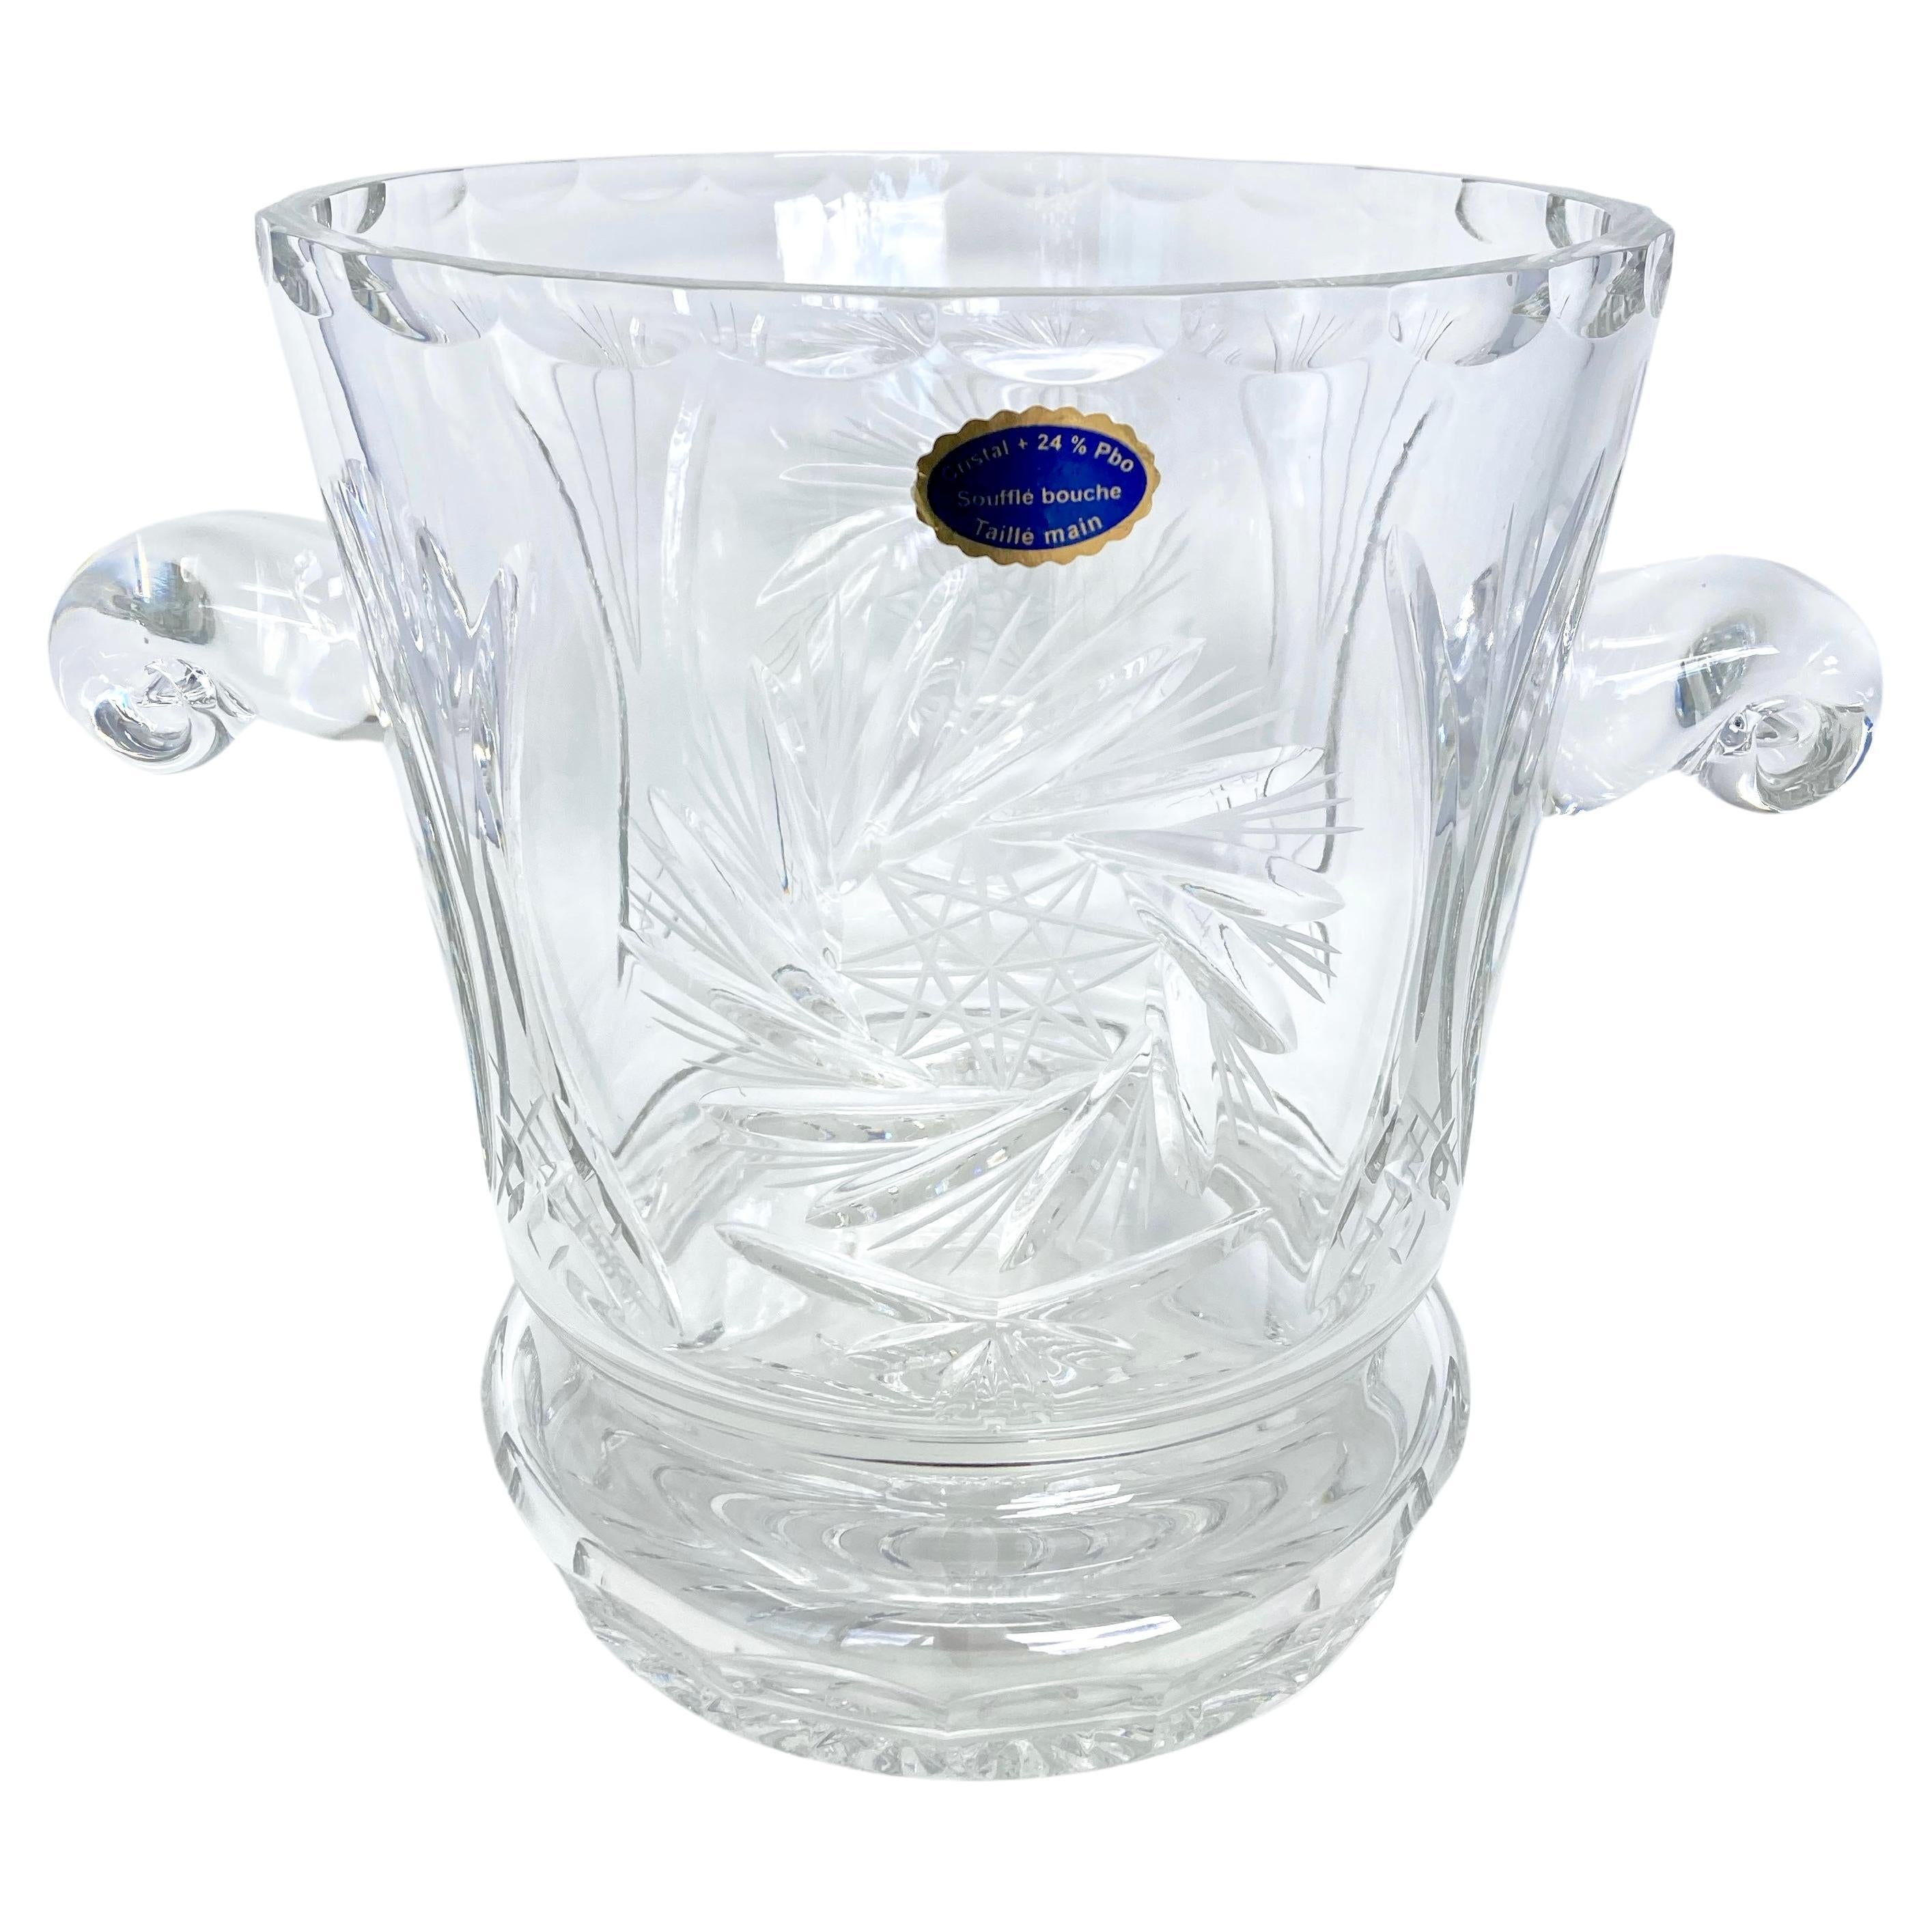 French 1980s Vintage Handmade Cut Crystal Champagne Bucket by Les Grands Ducs